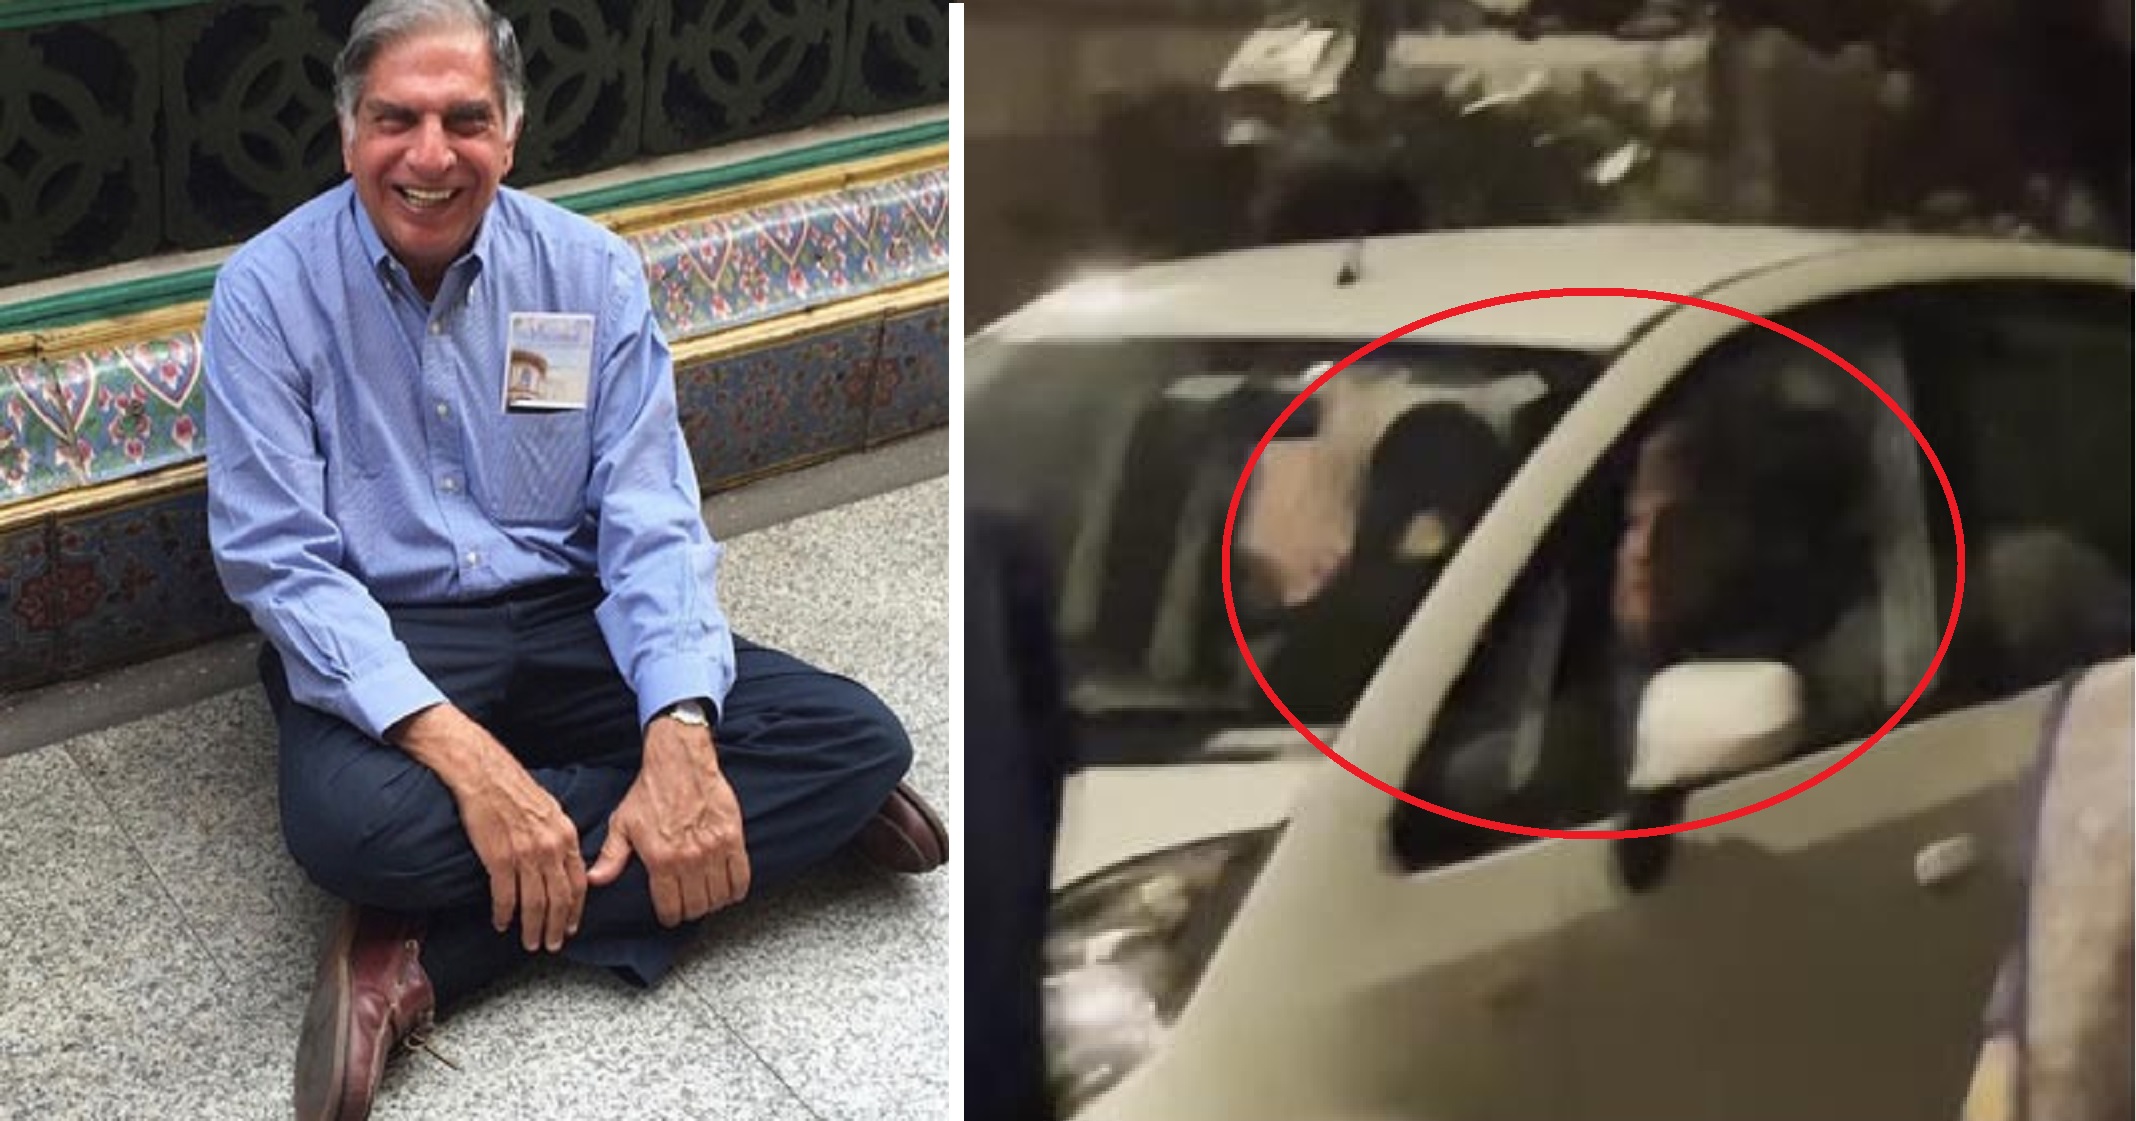 Ratan Tata Visits Taj Hotel In Nano Car Without Bodyguards, Wins Hearts With His Humility Again